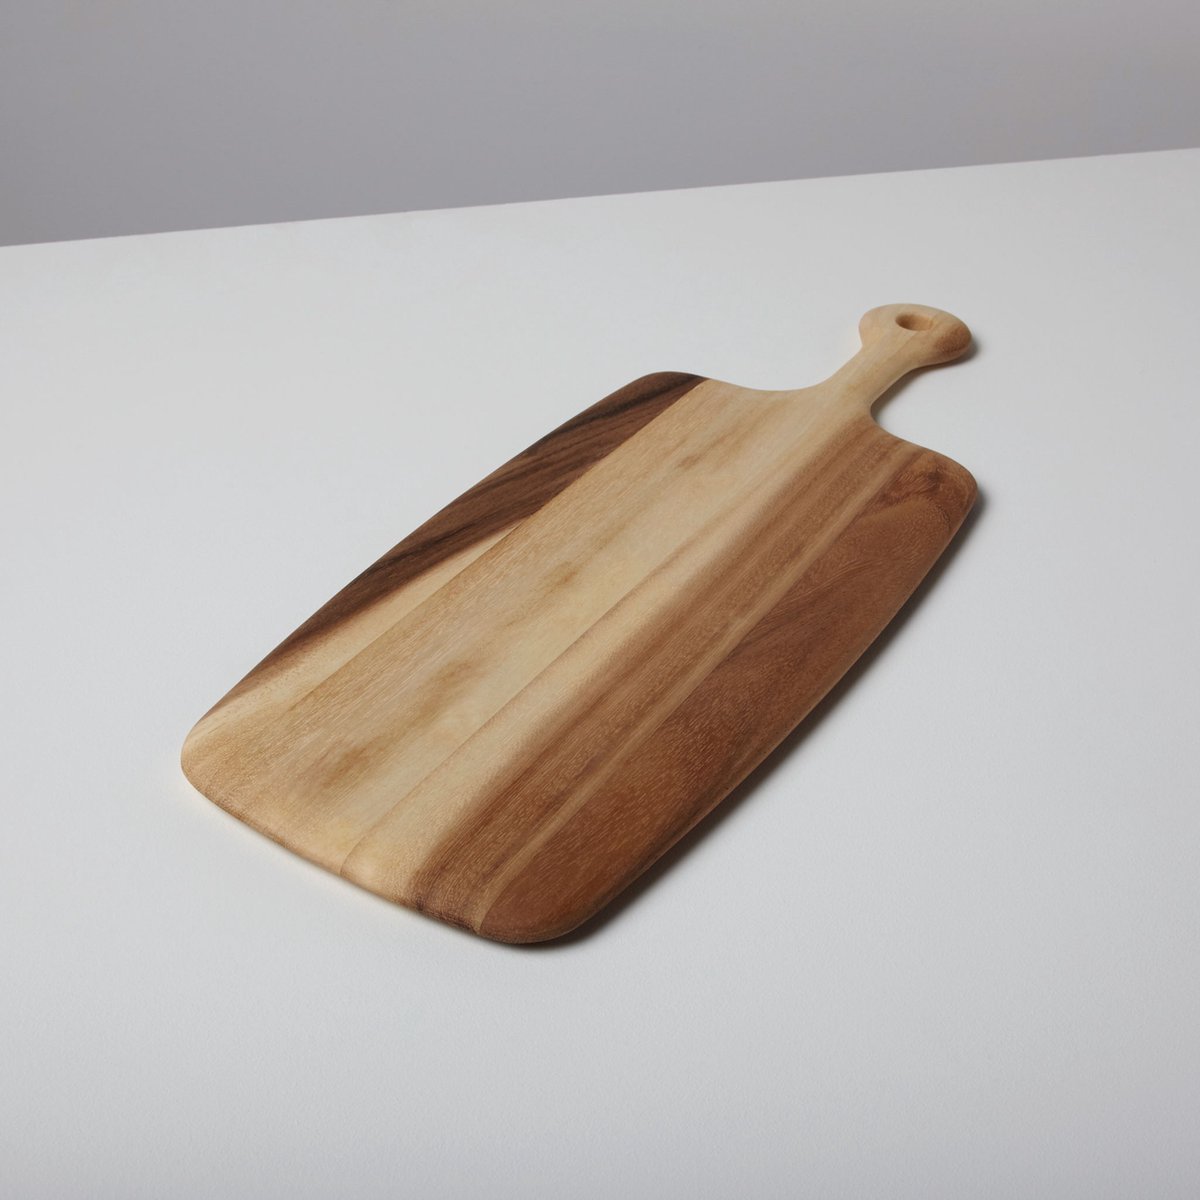 Acacia Rectangular Tapered Board with Rounded Handle, Small - Snijplank